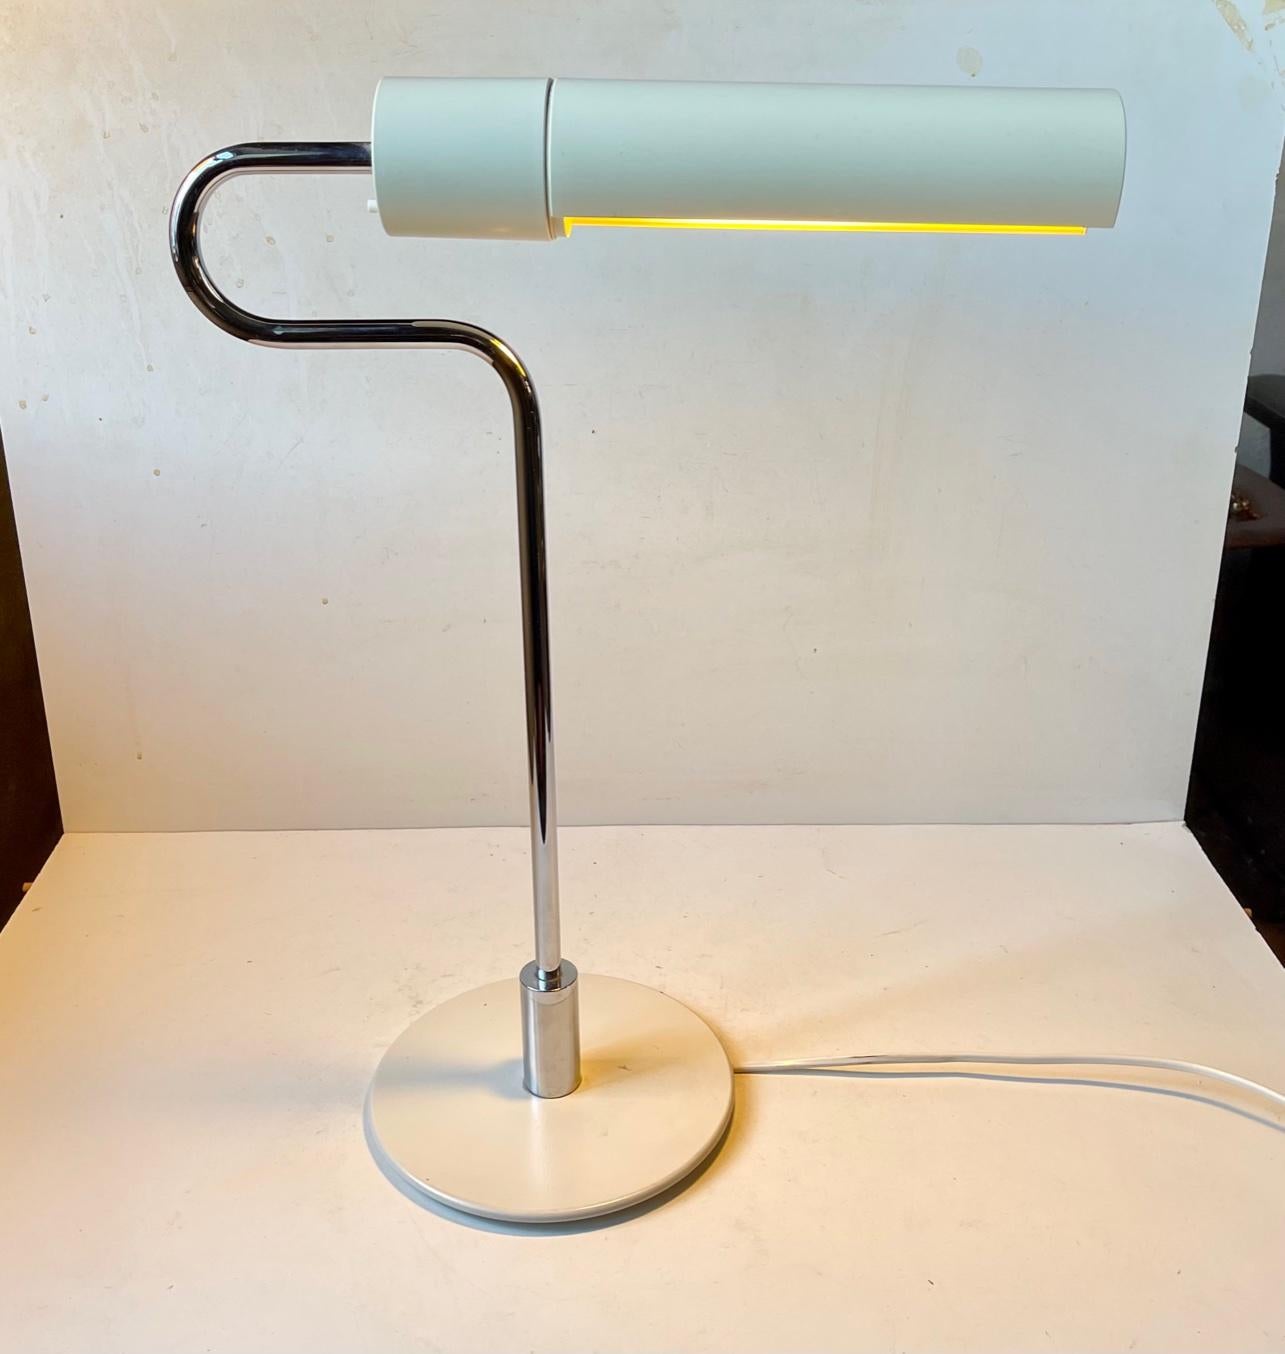 Interesting tubular desk or architects table lamp from Royal Copenhagen. It was designed during the 1980s by the Danish architect Jorgen Moller. The curled chromed plated stem resembles the neck of a Flamingo hence its name. It features an